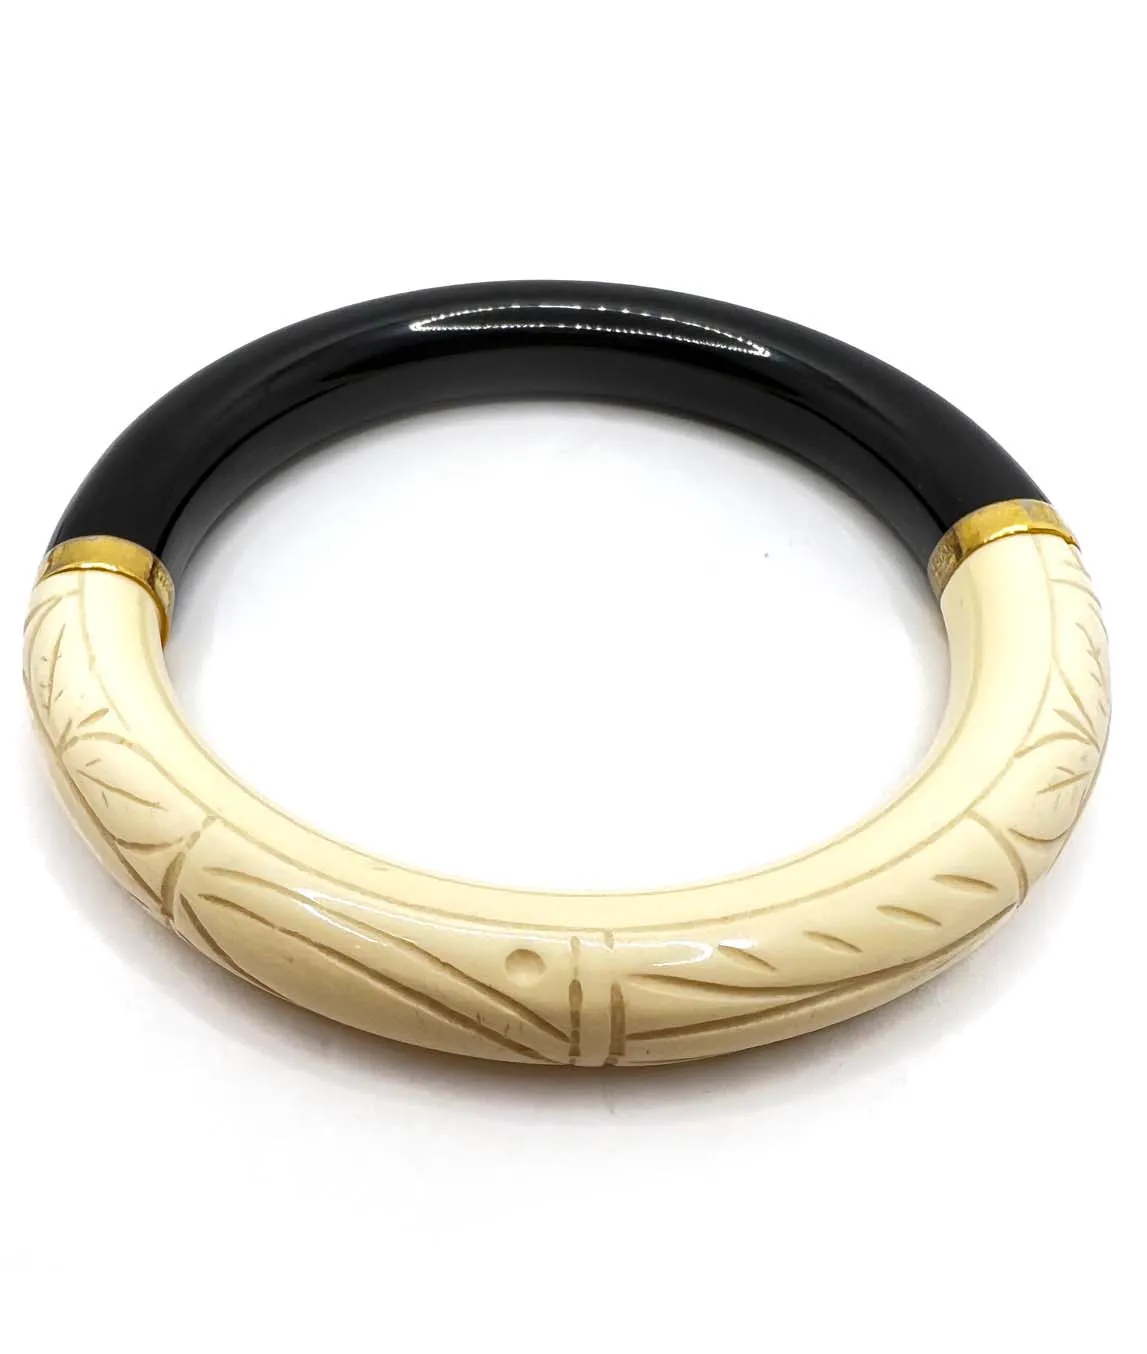 Carved plastic bangle bracelet by Givenchy ivory and black in colour